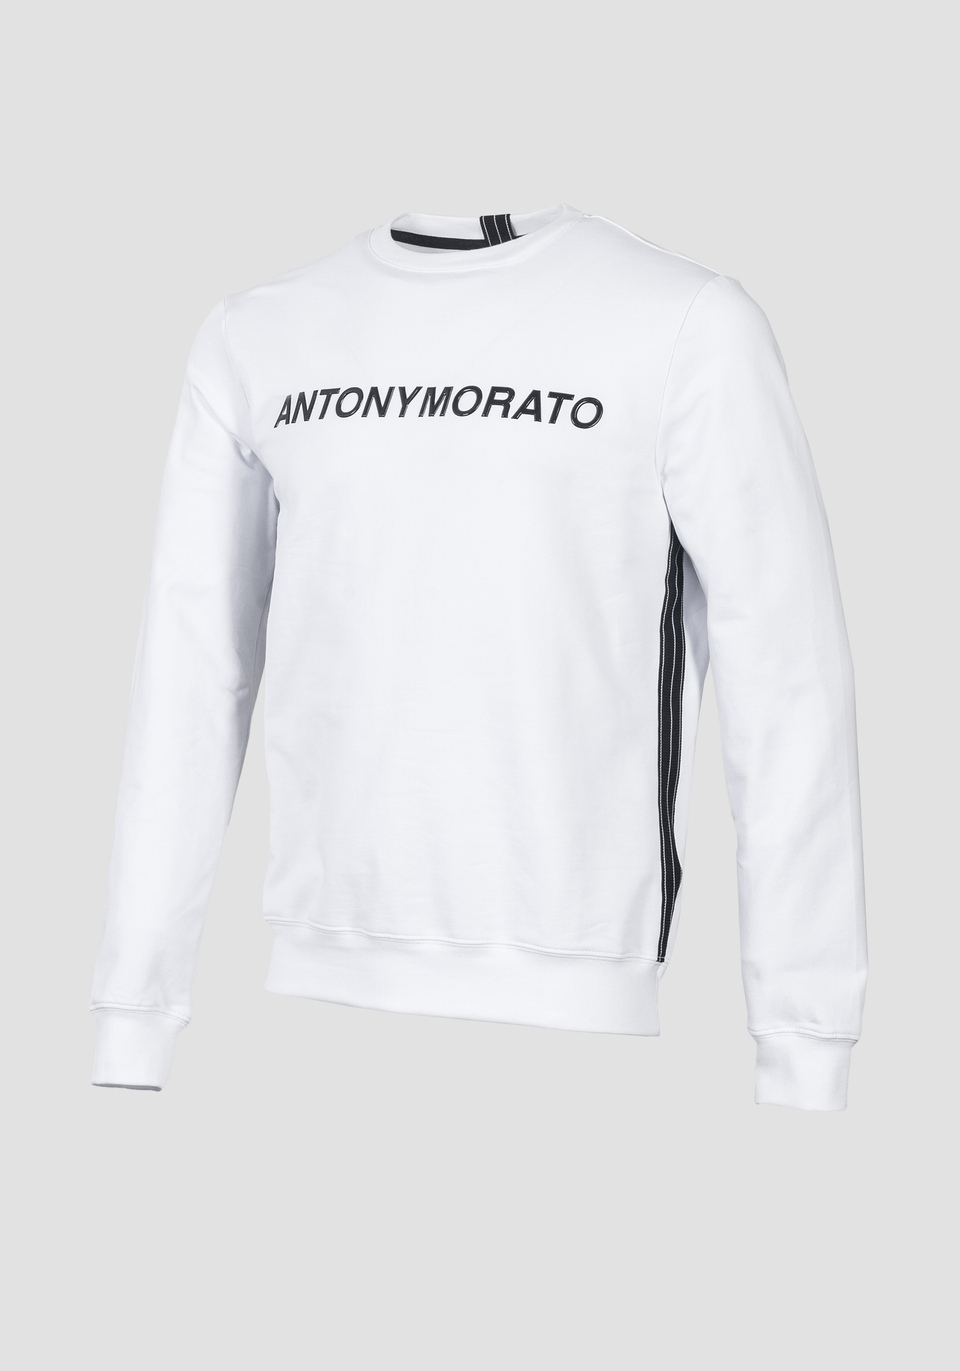 SLIM FIT SWEATSHIRT IN STRETCH COTTON WITH GLOSS FRONT PRINT - Antony Morato Online Shop